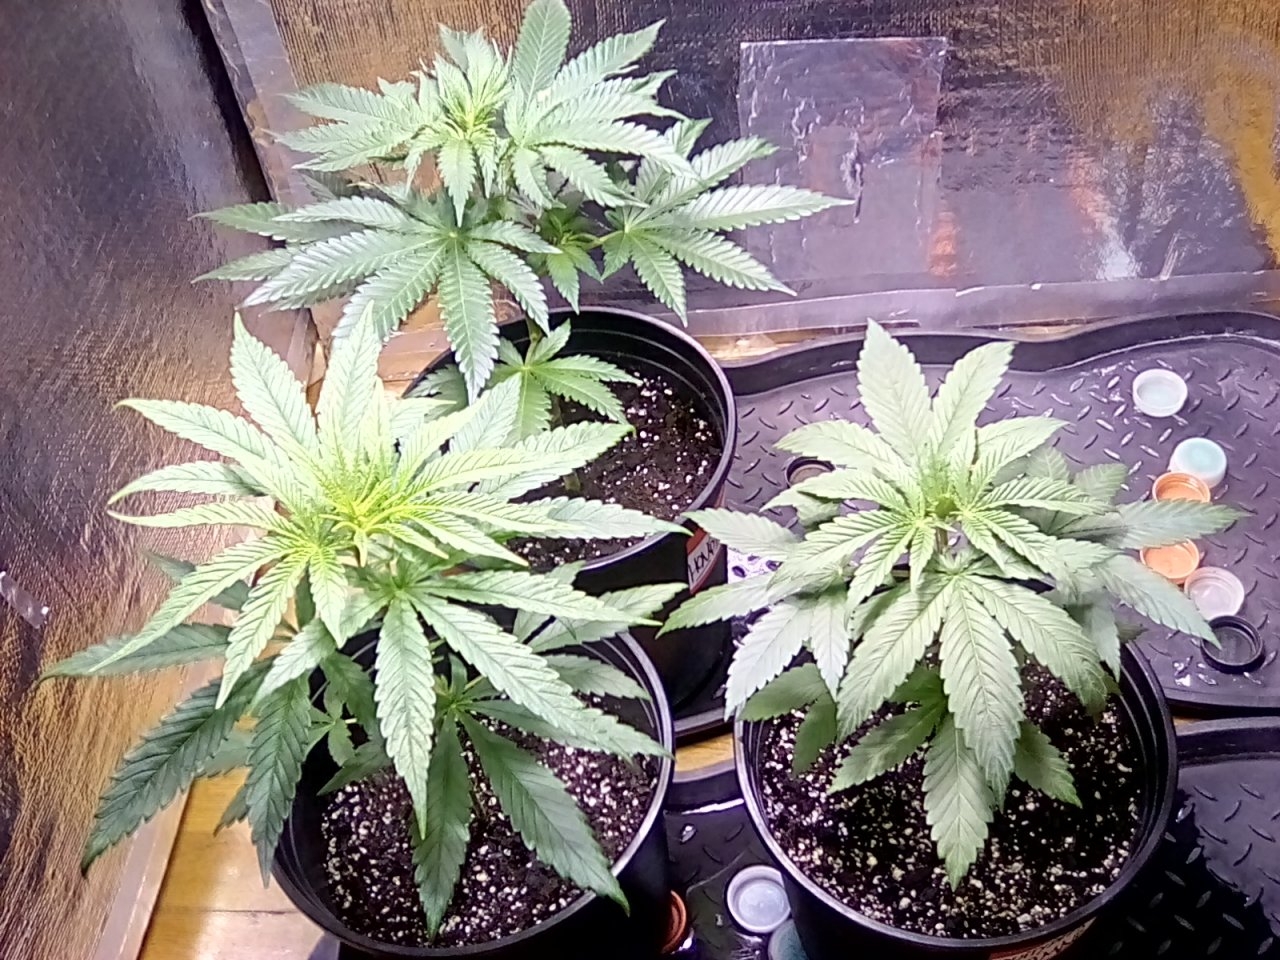 Day 3 of the flip 28 days old from seed.